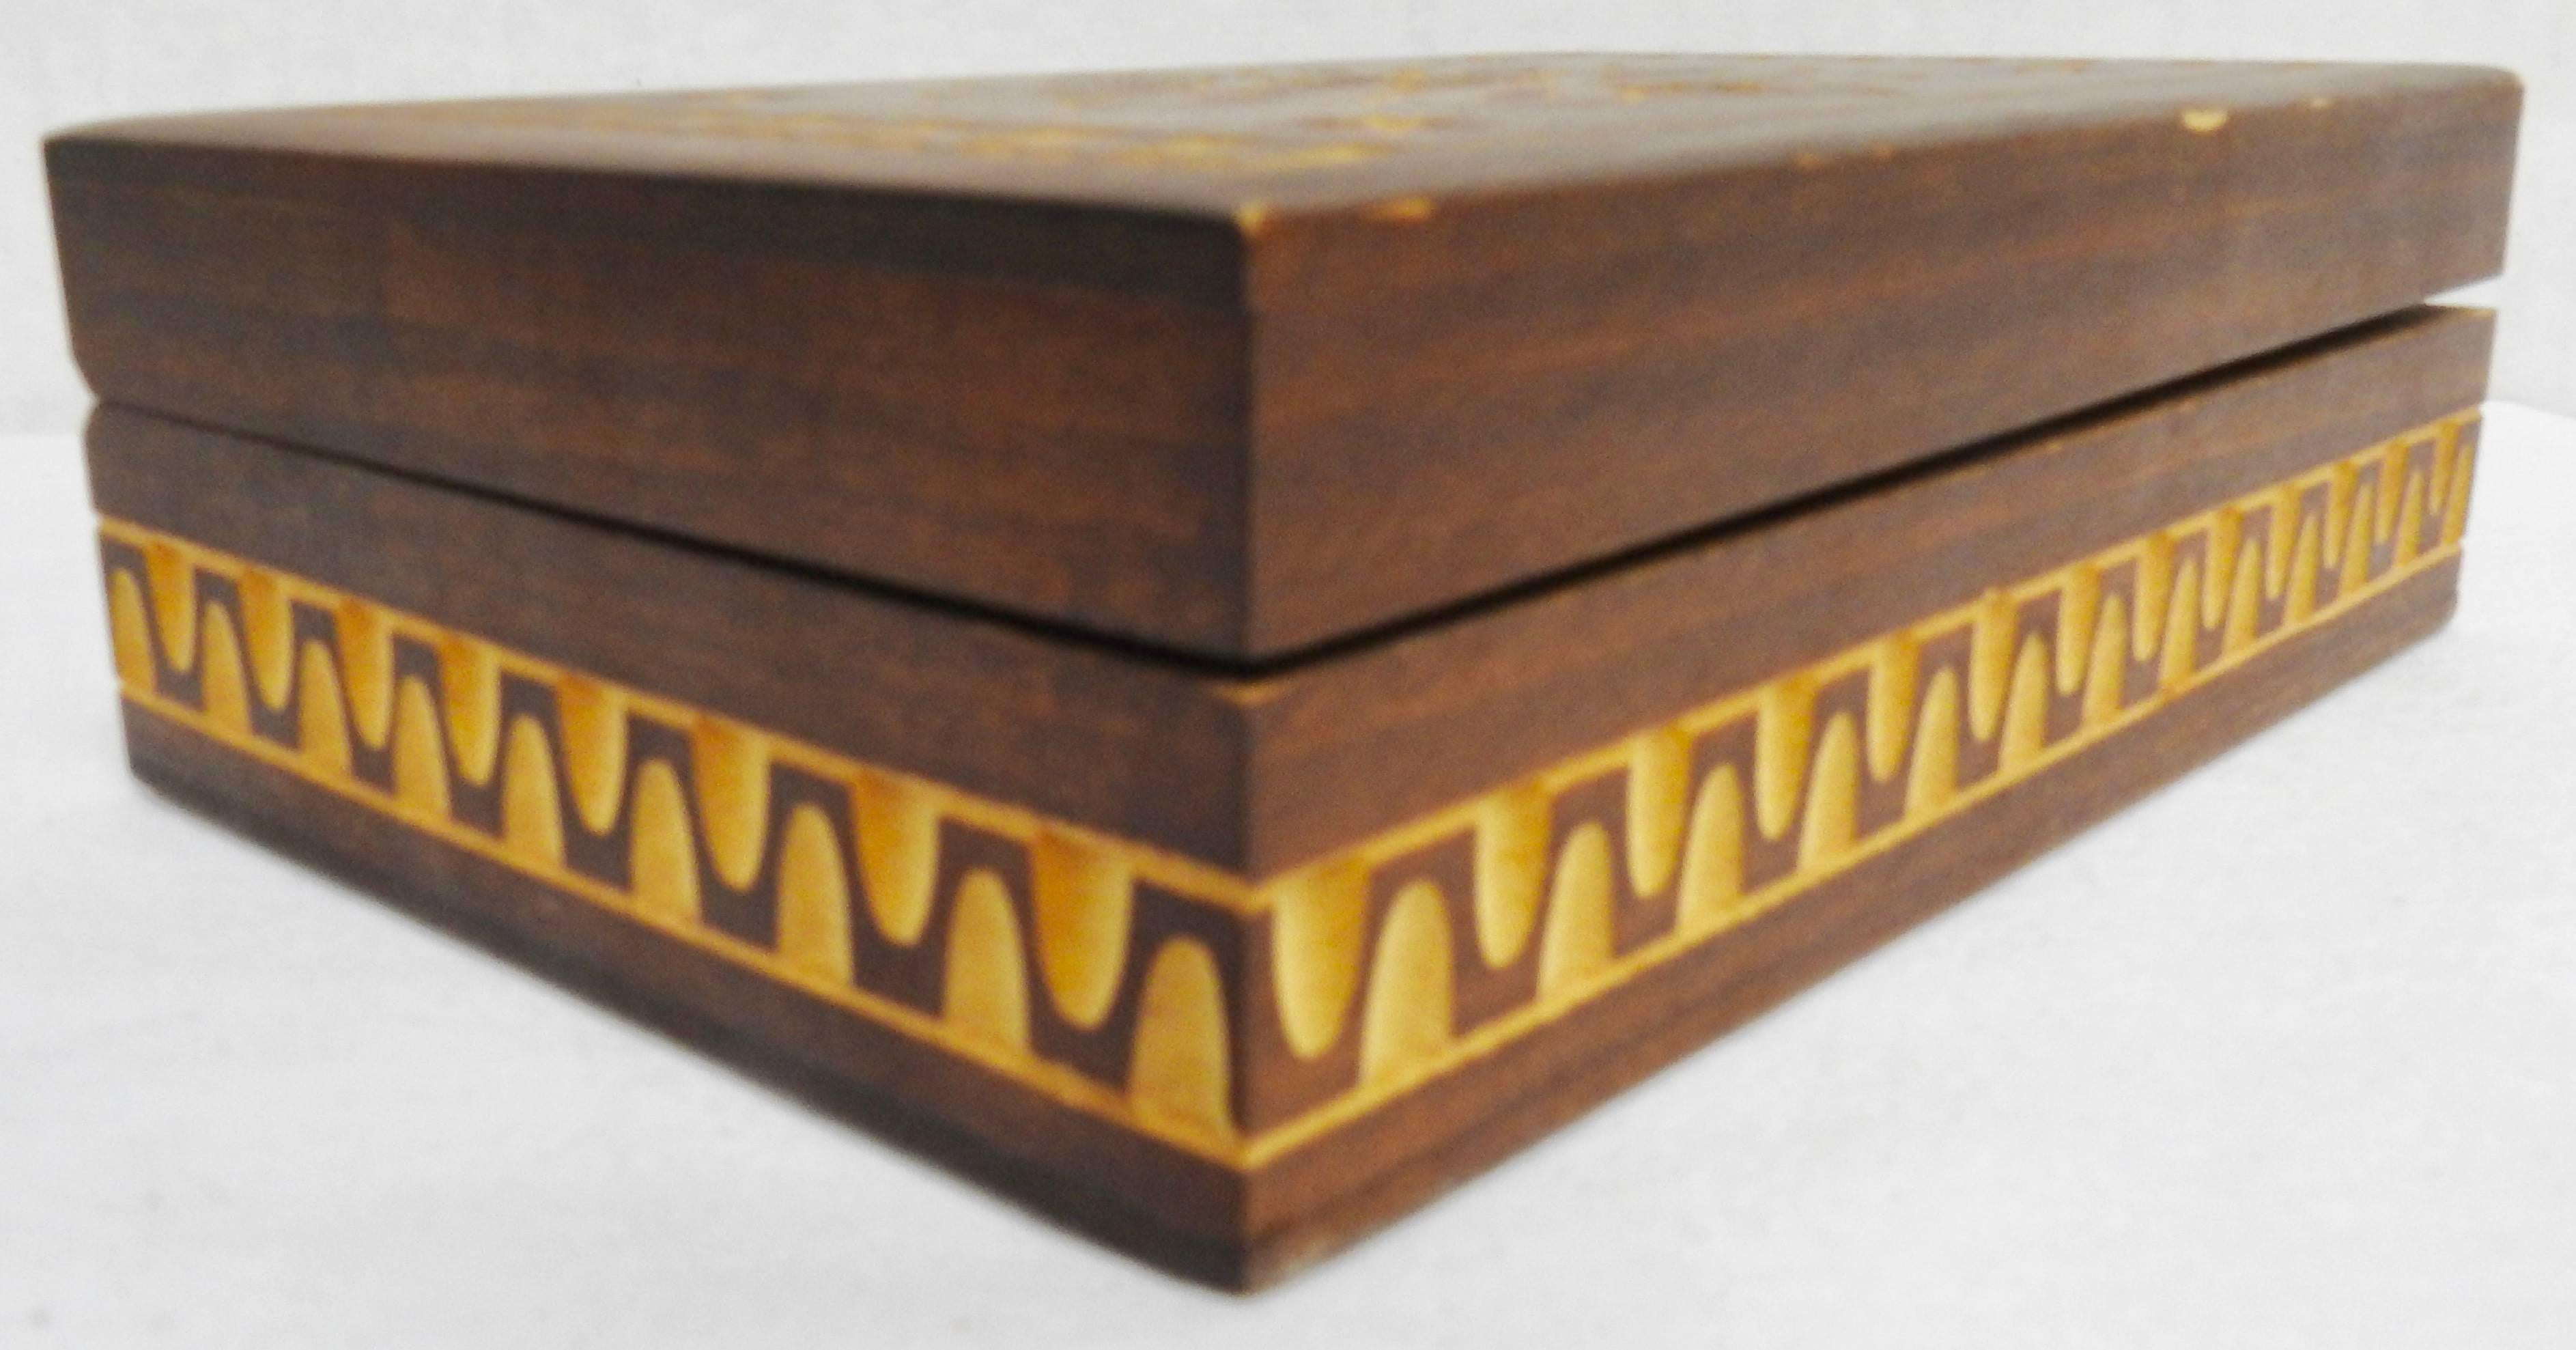 This vintage wooden box has been stained and beautiful carvings added to let the natural wood show through. The inside of the box is unfinished.